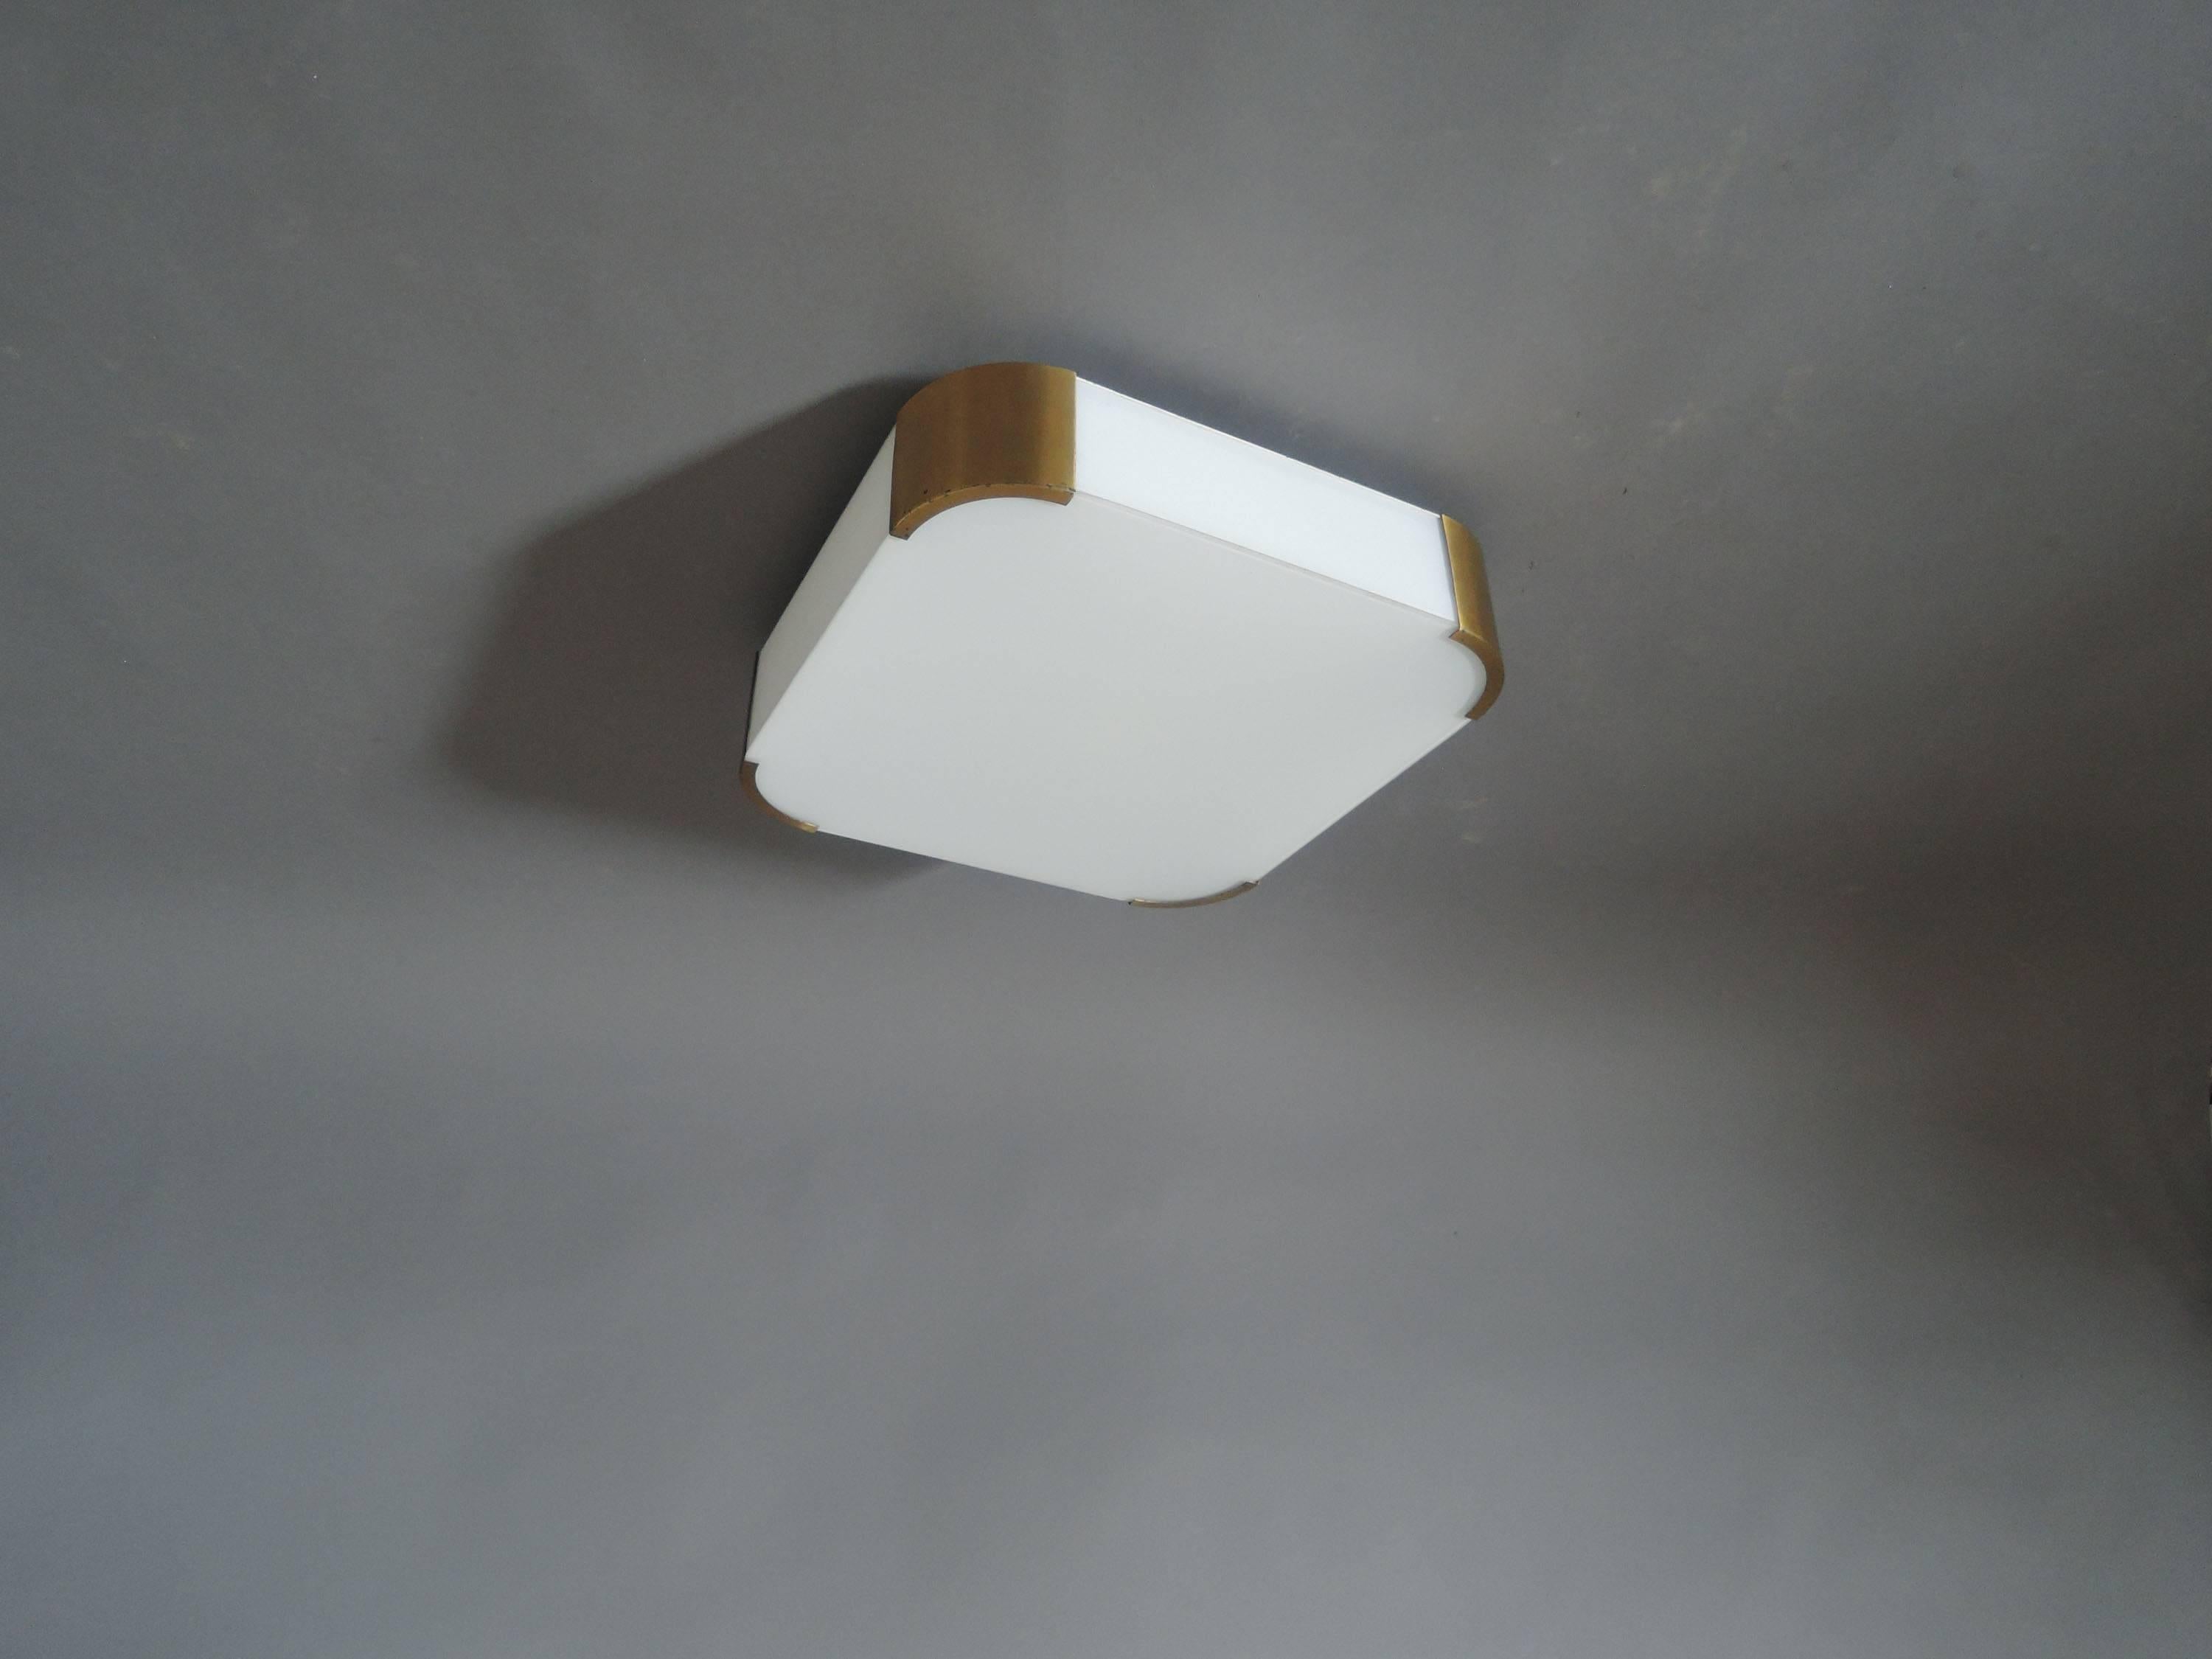 Fine French Art Deco Glass and Bronze Square Ceiling or Wall Light by Perzel 1